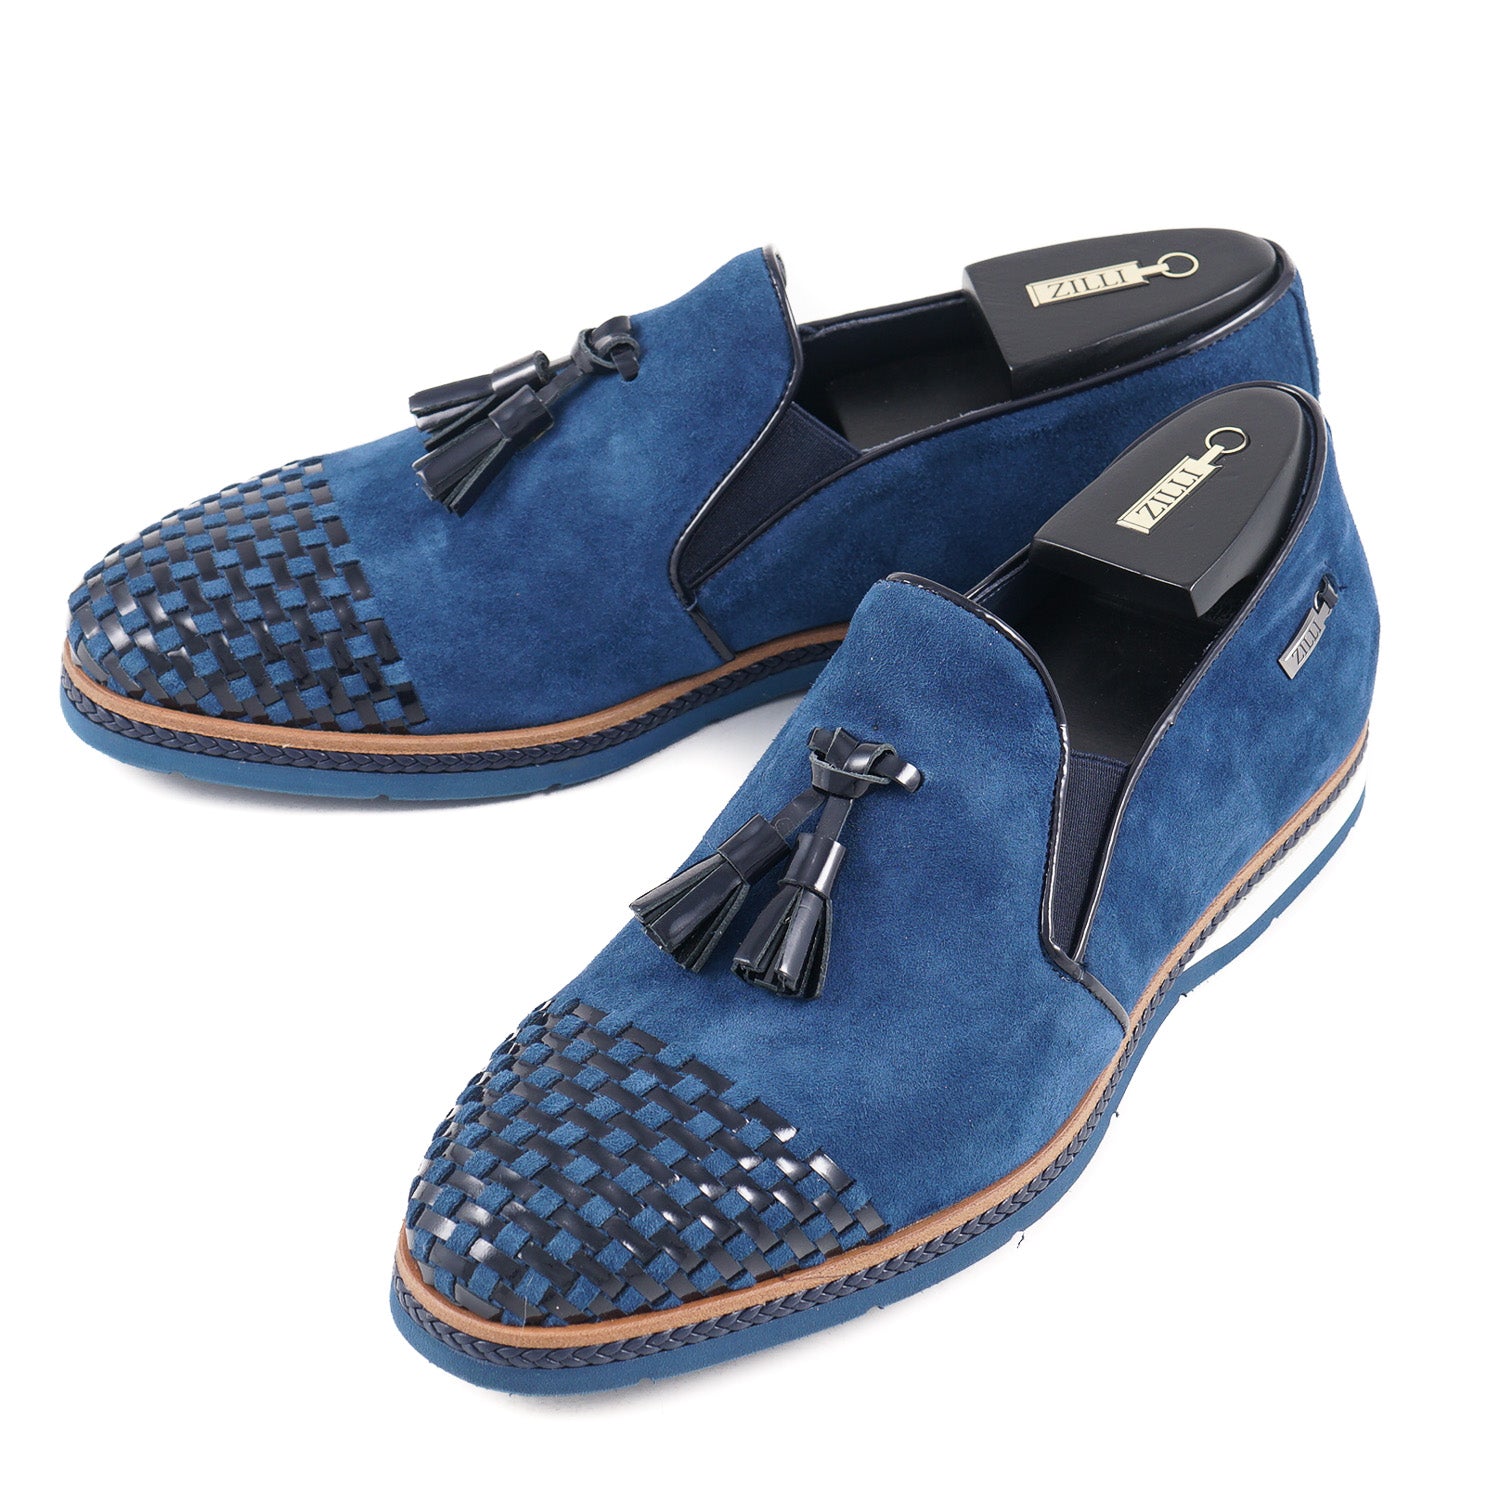 Zilli Suede Tassel Loafer with Woven Detail - Top Shelf Apparel